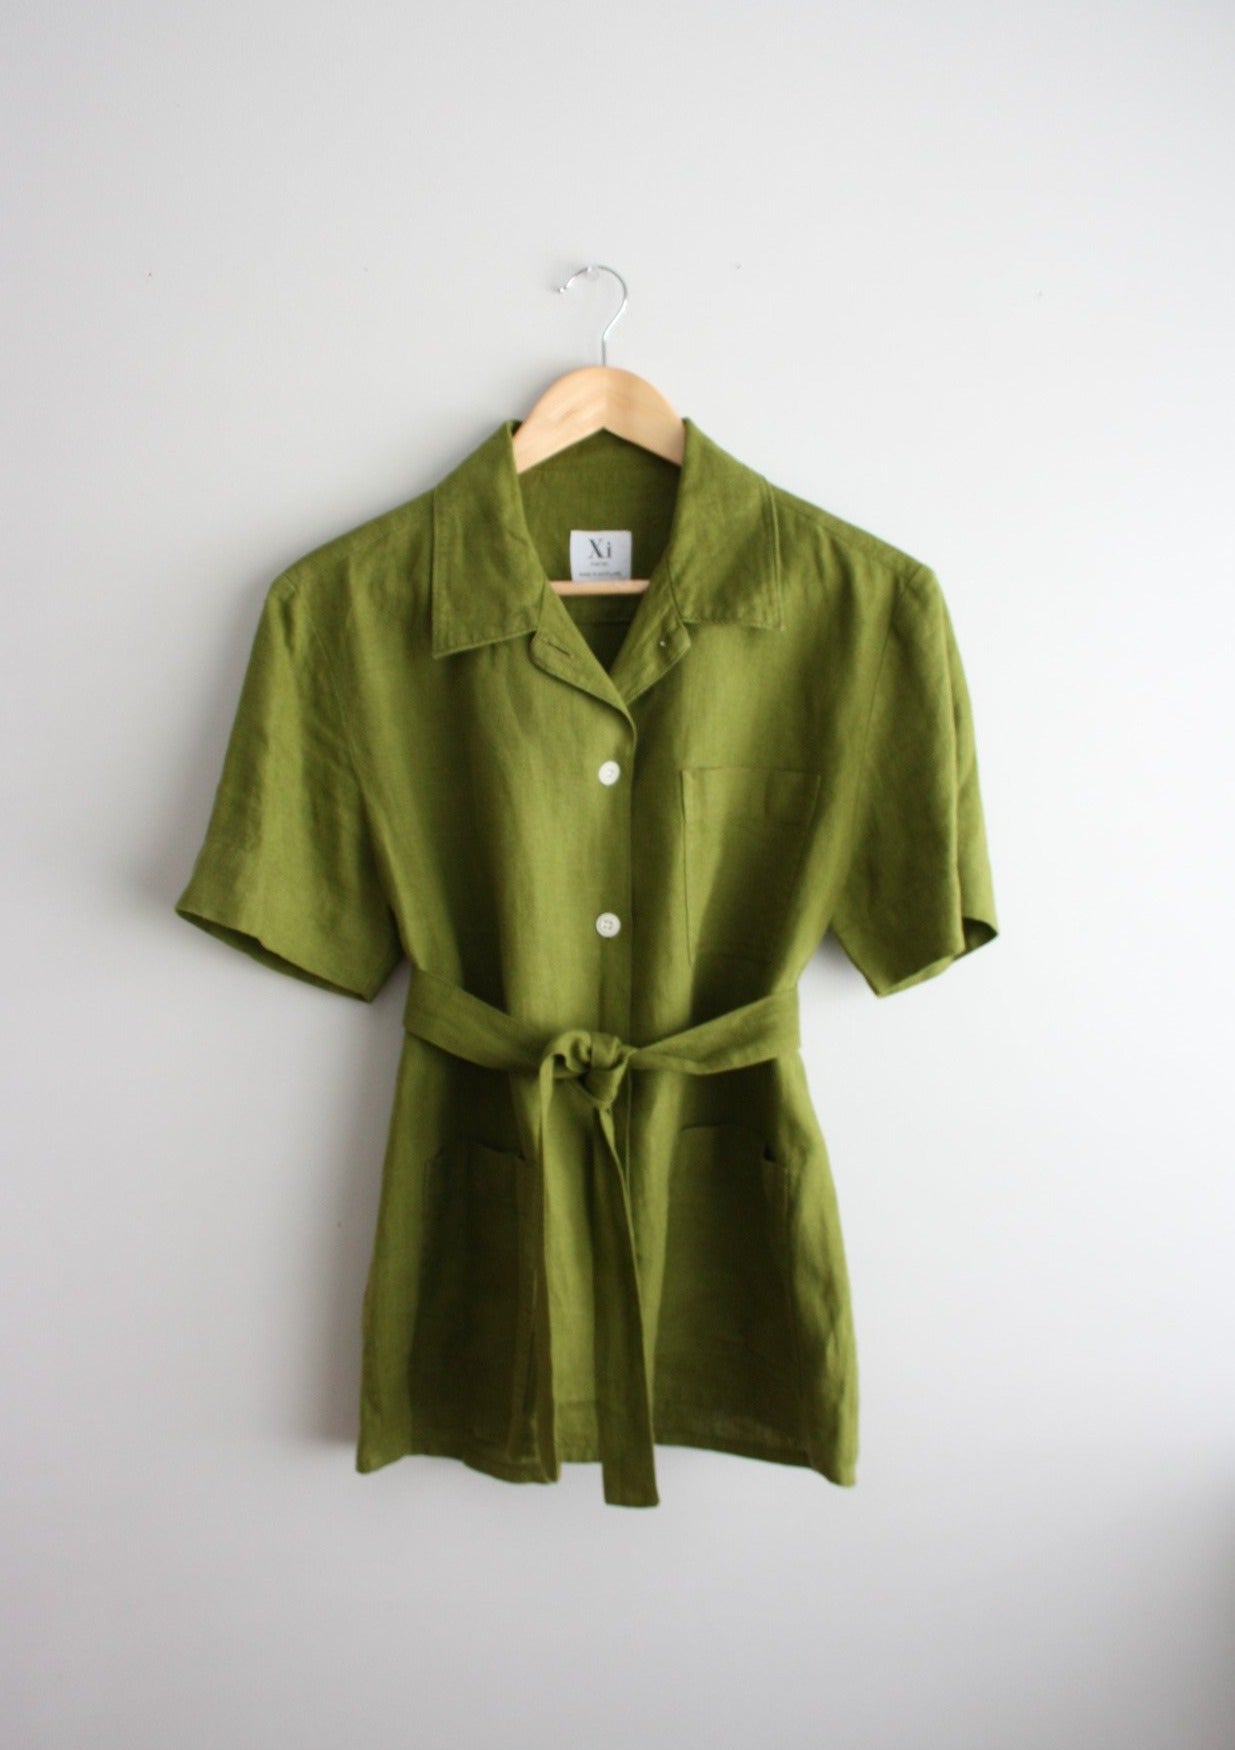 Cleo Shirt sample in Green size 6 UK